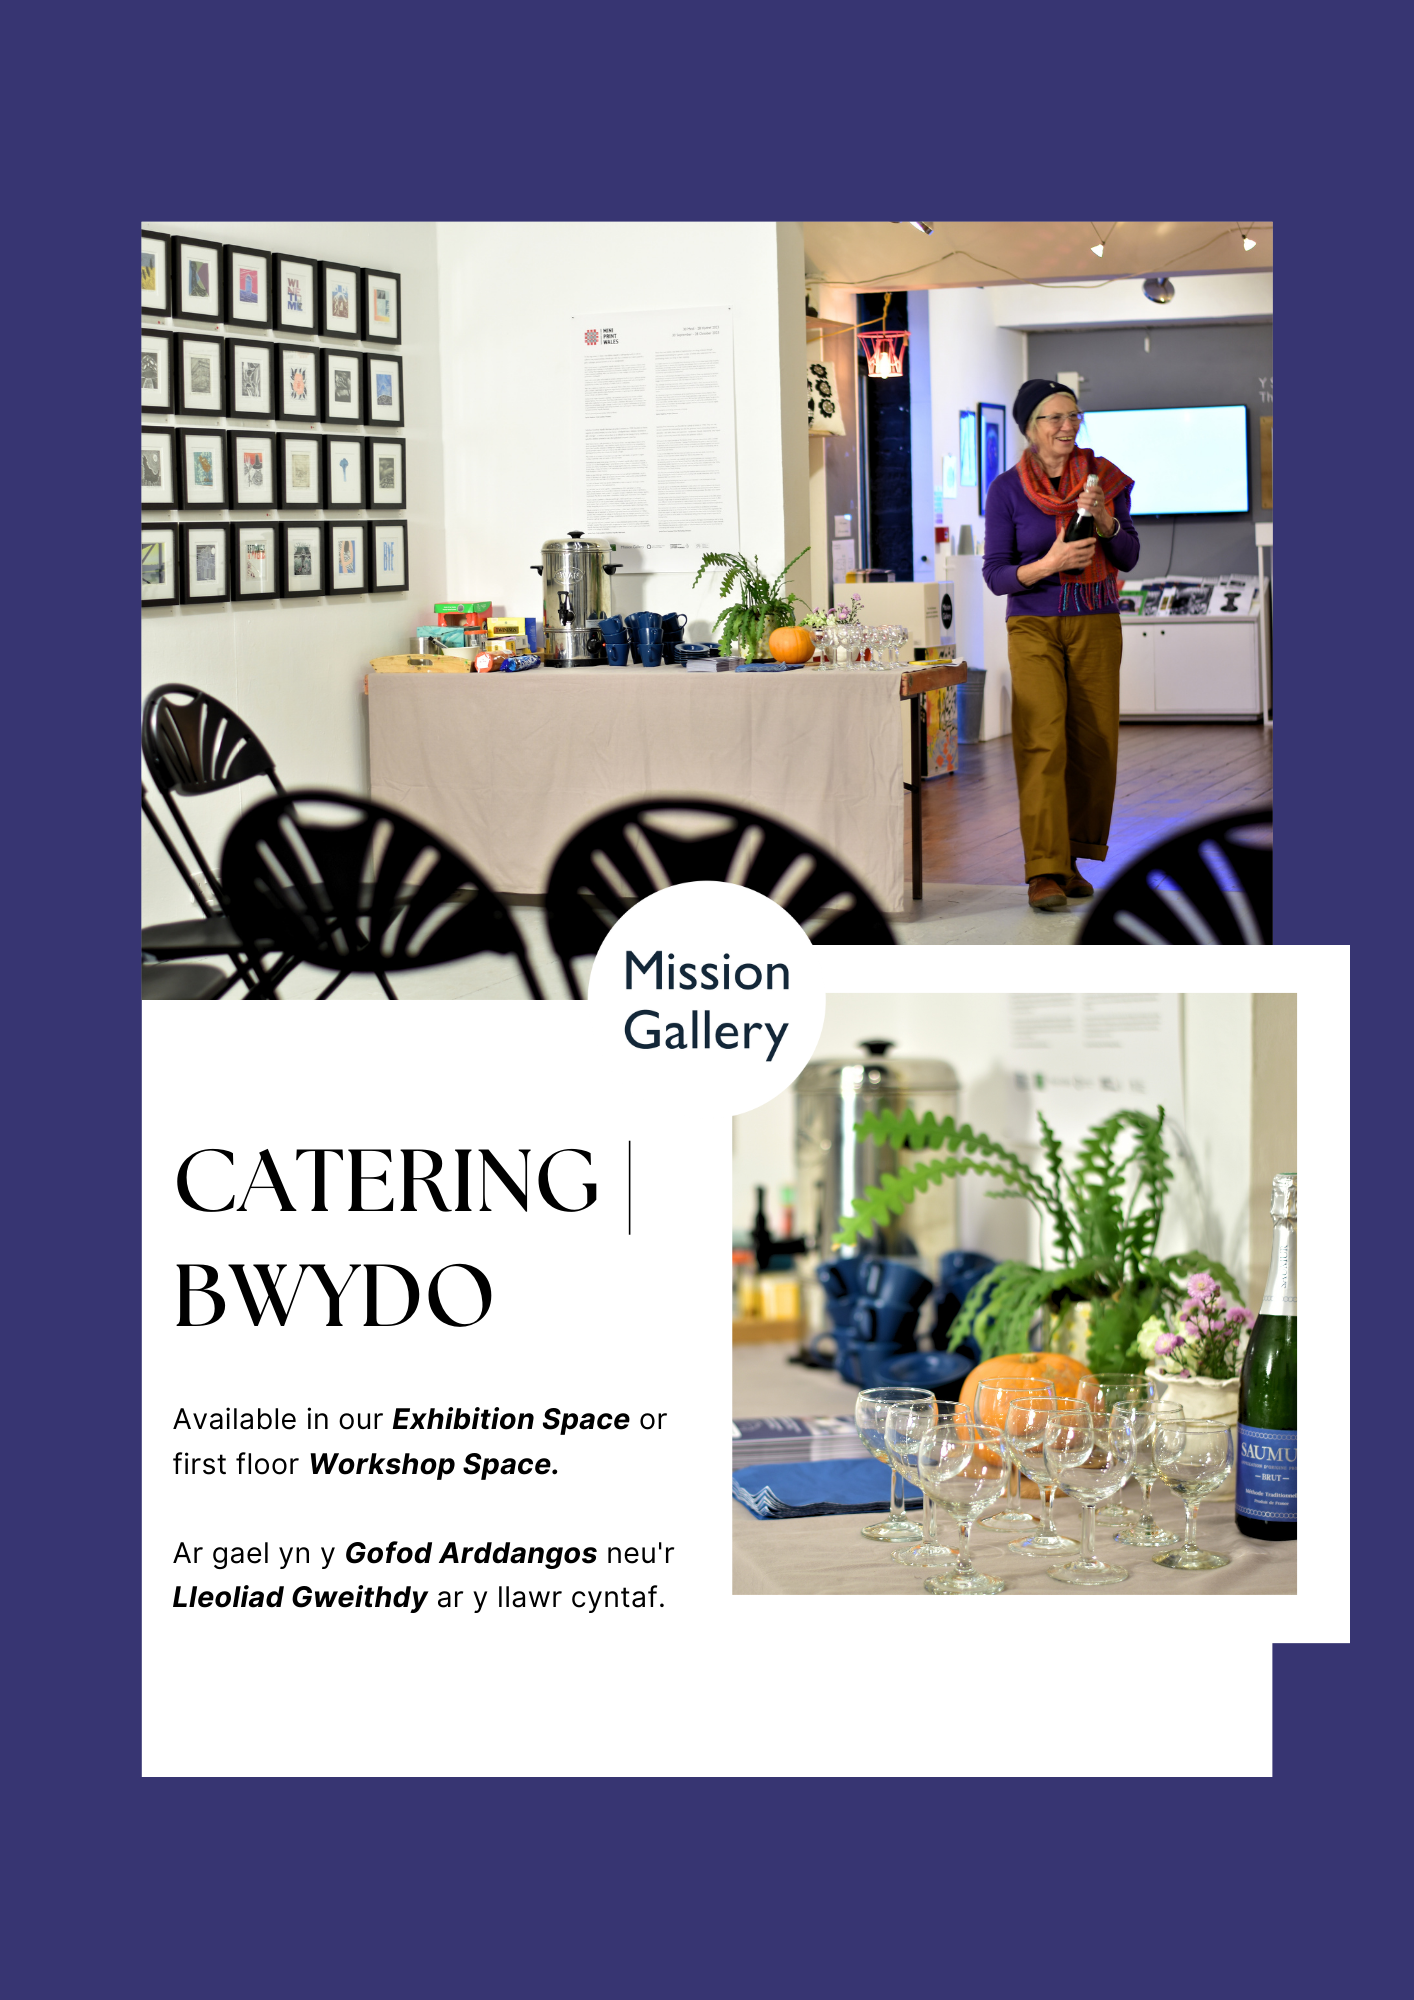 Mission Gallery Venue Hire Pack, catering